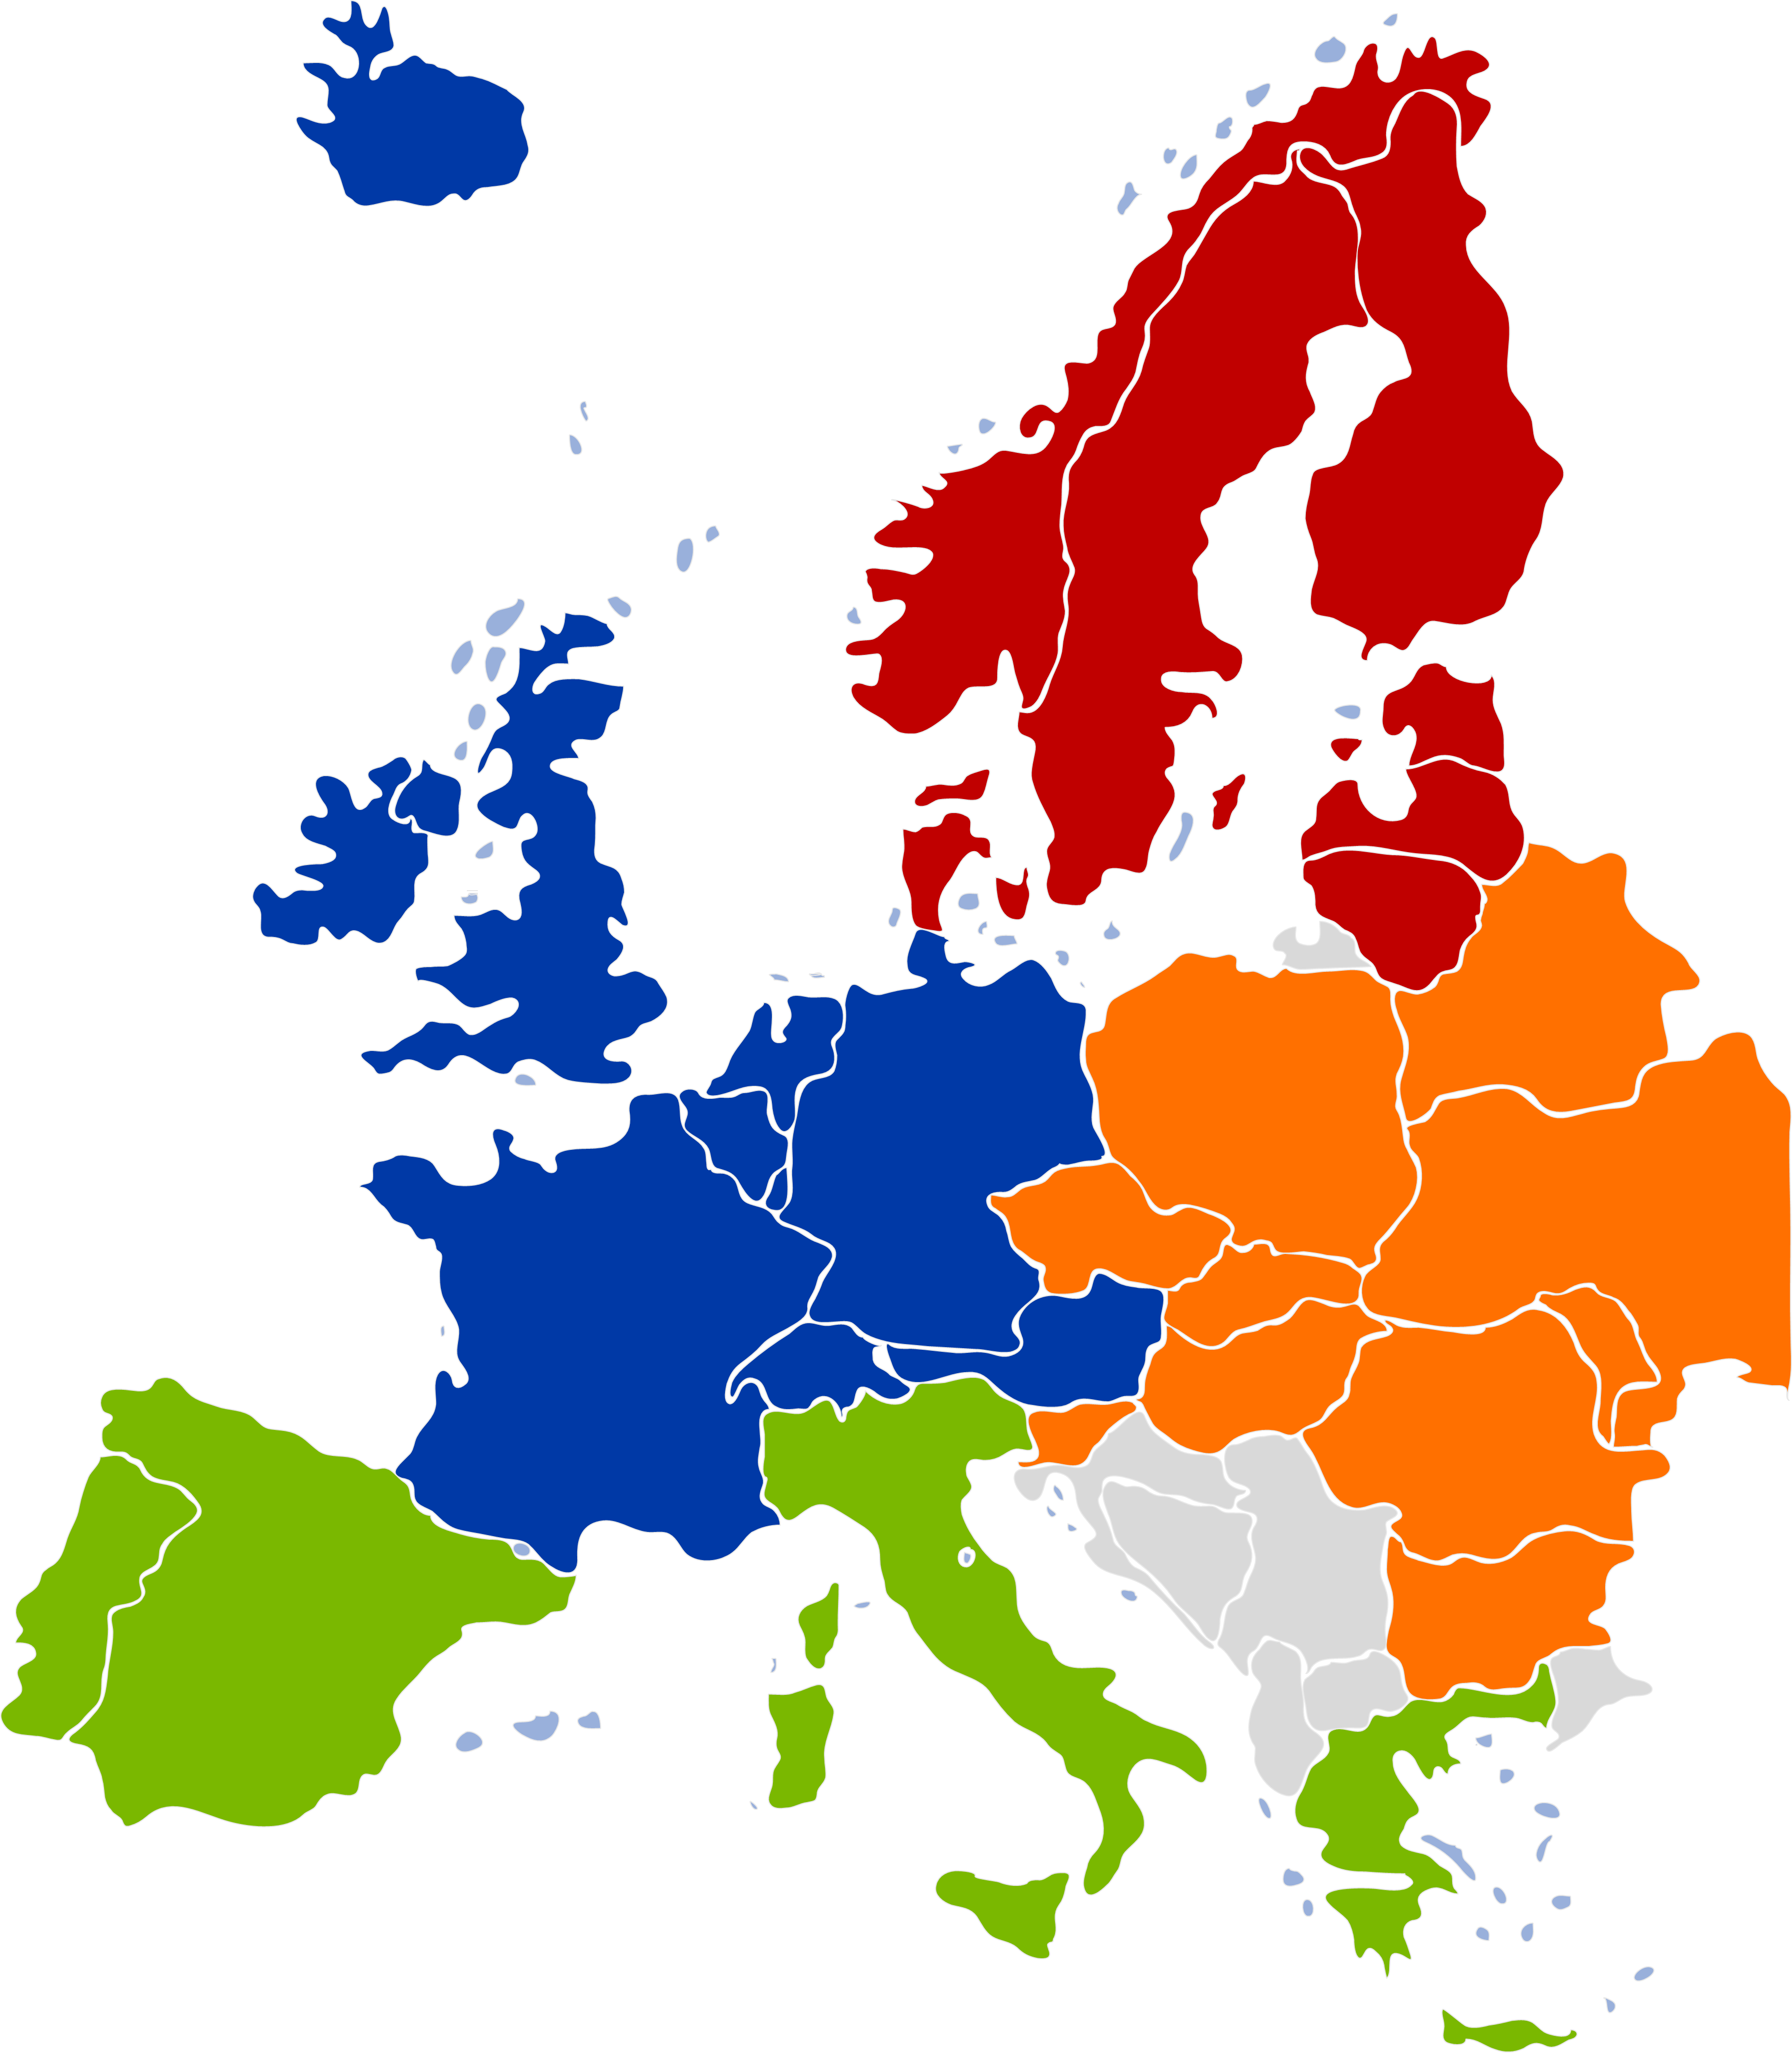 Country coverage of regional partners